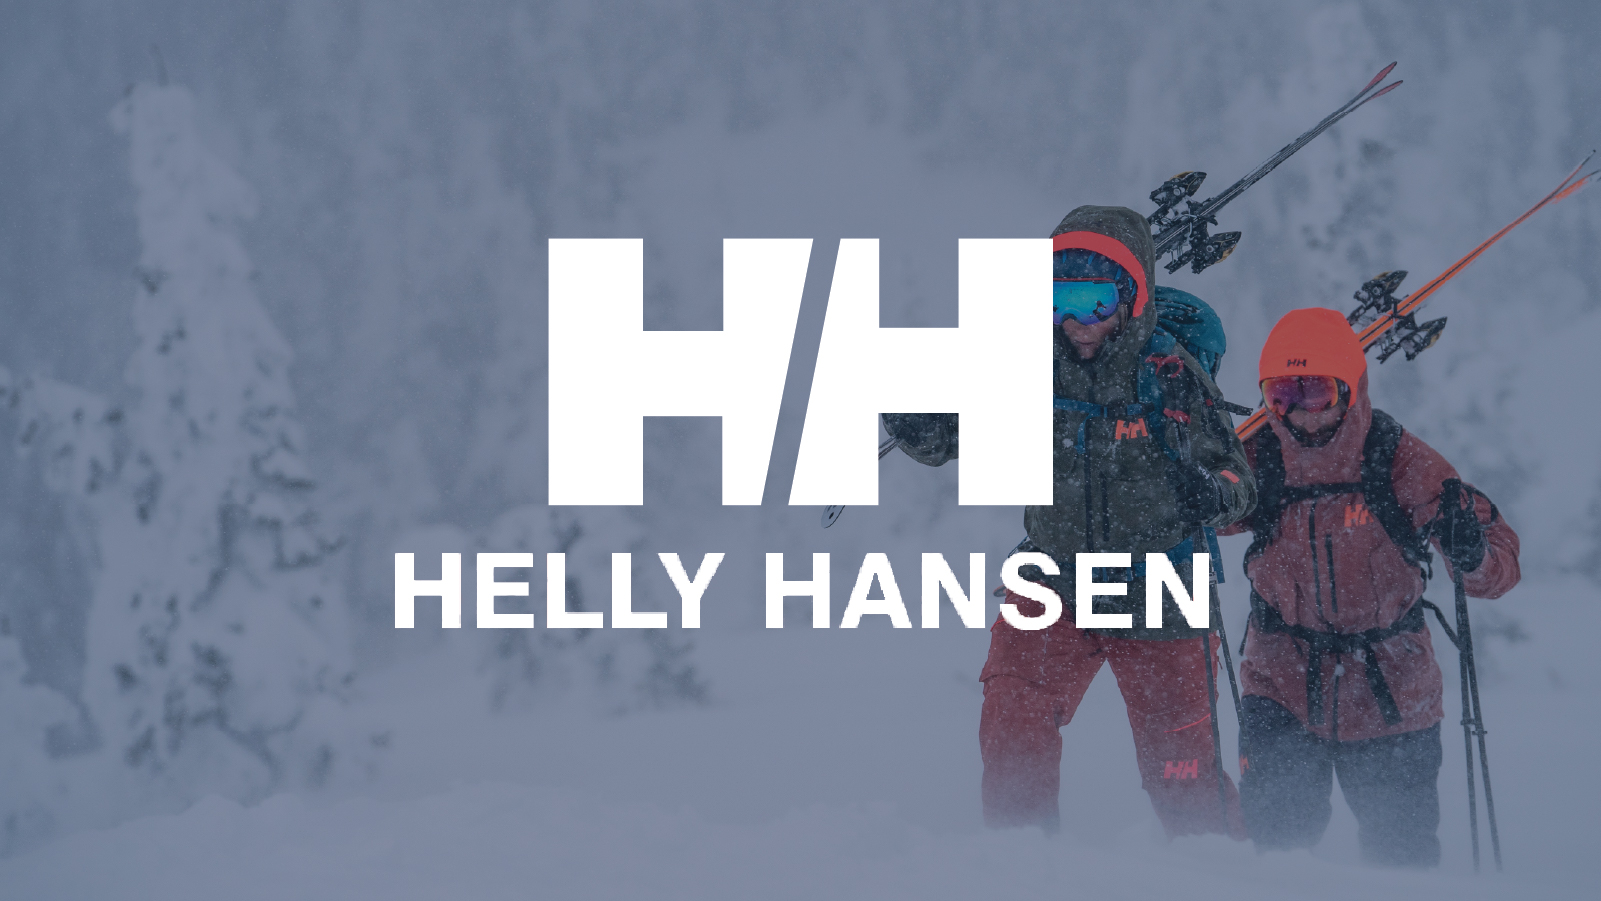 Graphic: Helly Hansen logo overlayed on two skiers hiking